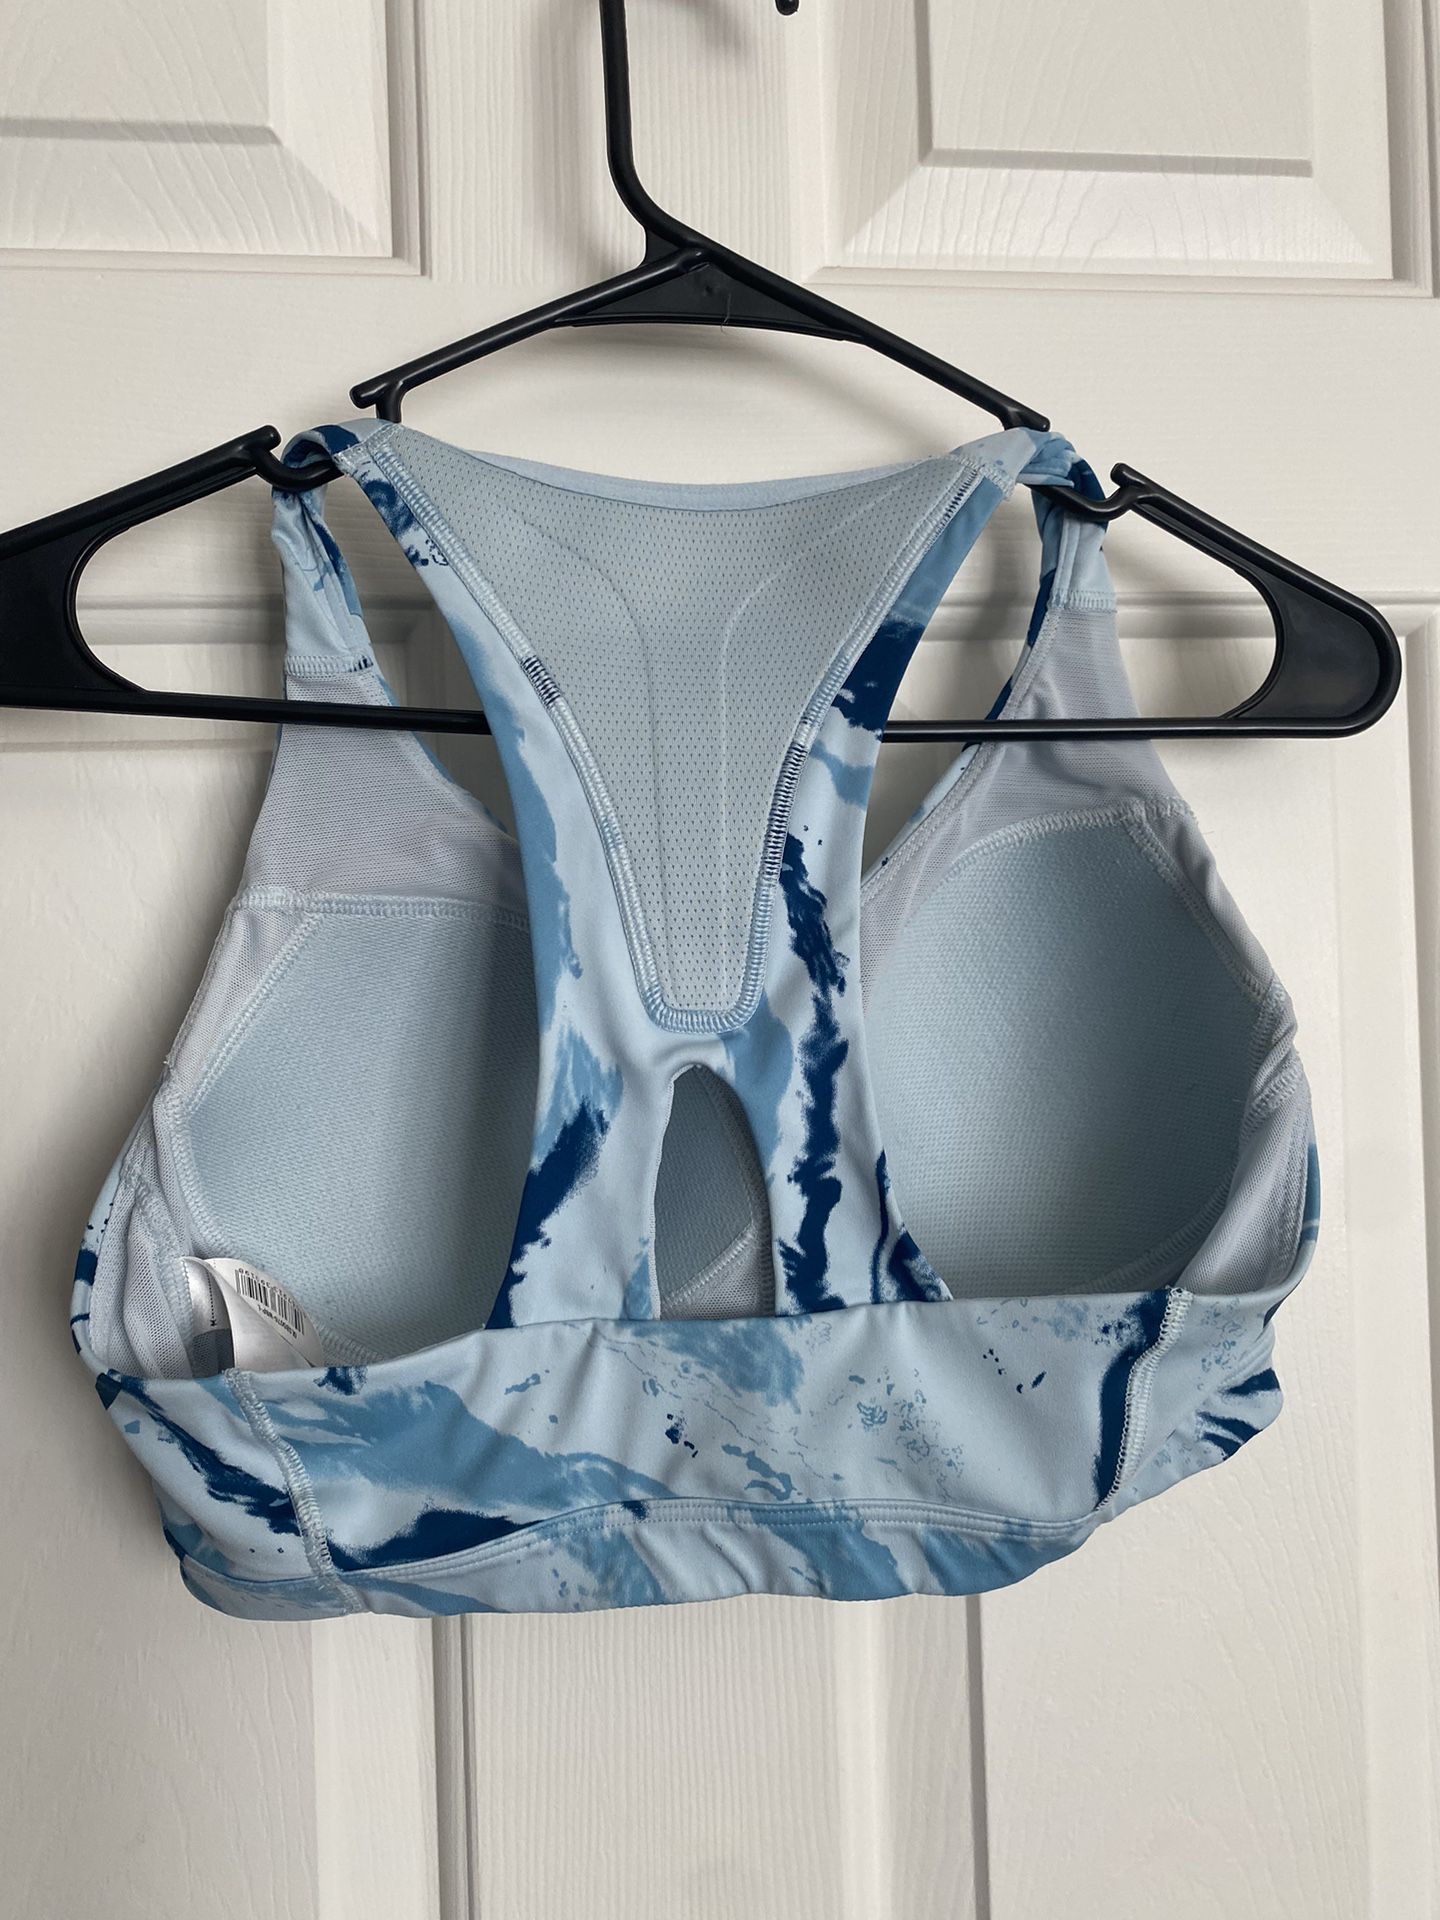 [New] Gymshark Adapt Ombre Seamless Sports Bra for Sale in Las Vegas, NV -  OfferUp